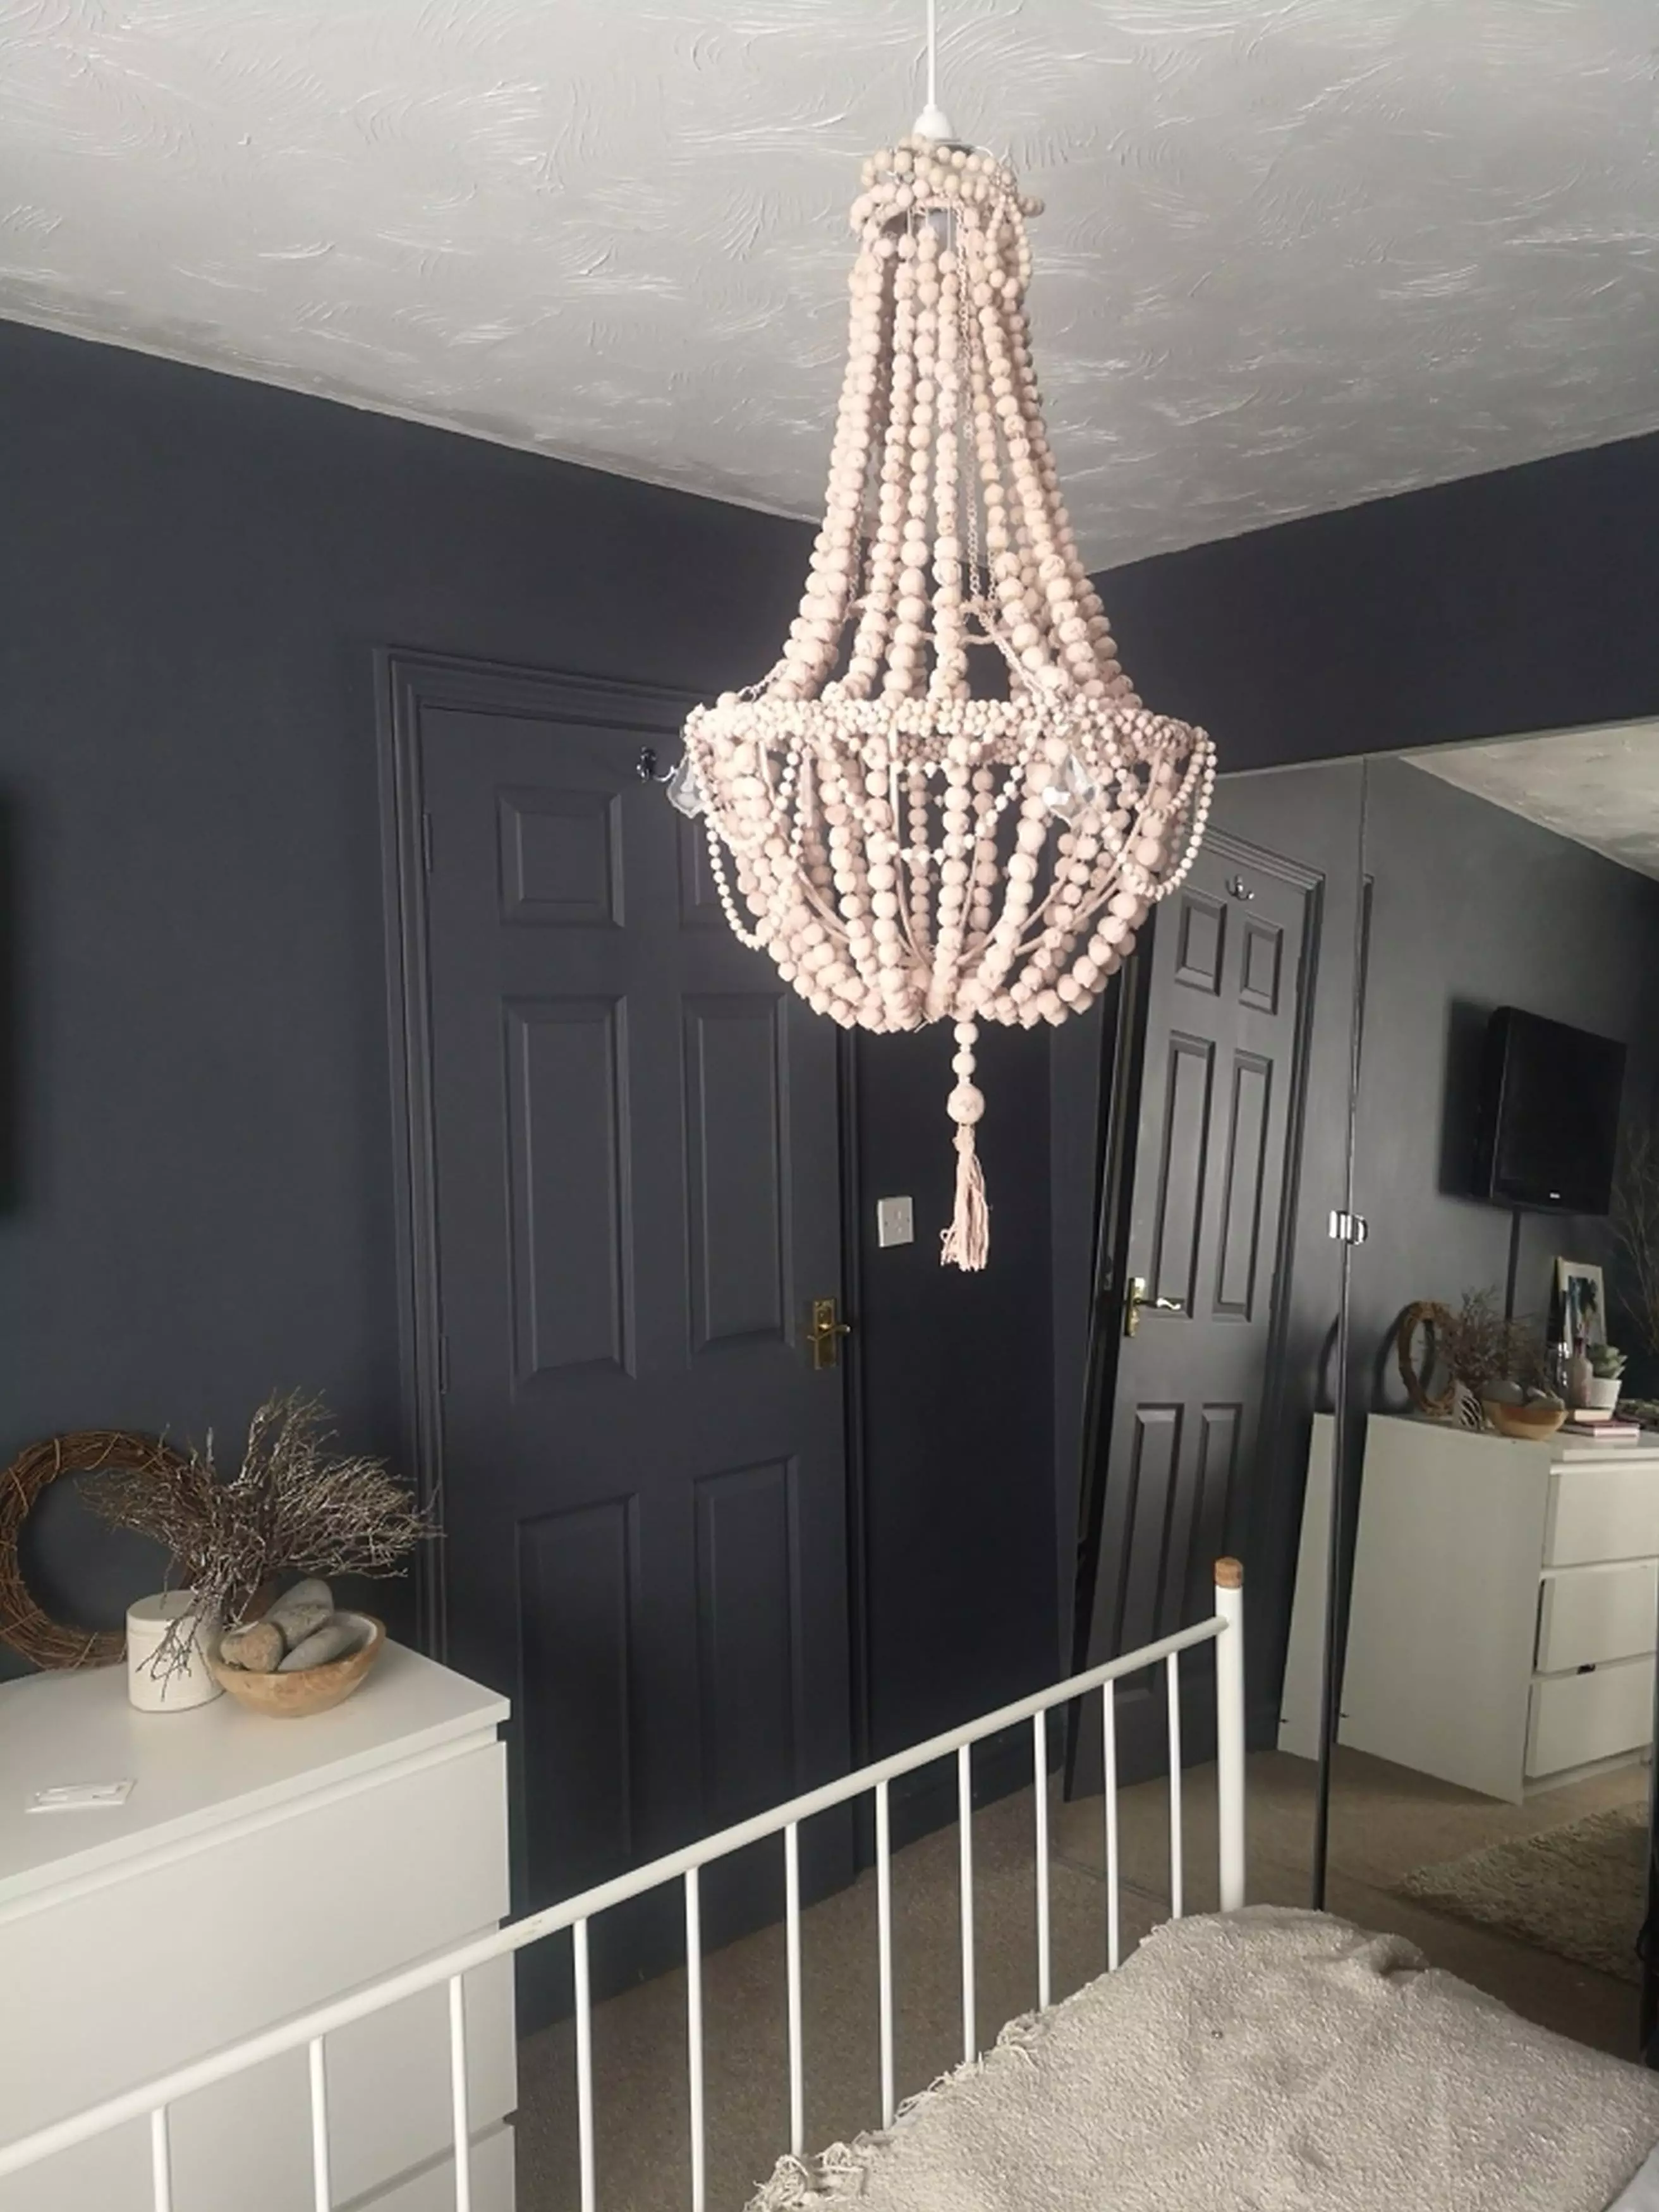 Her pasta chandelier now takes pride of place above her bed (